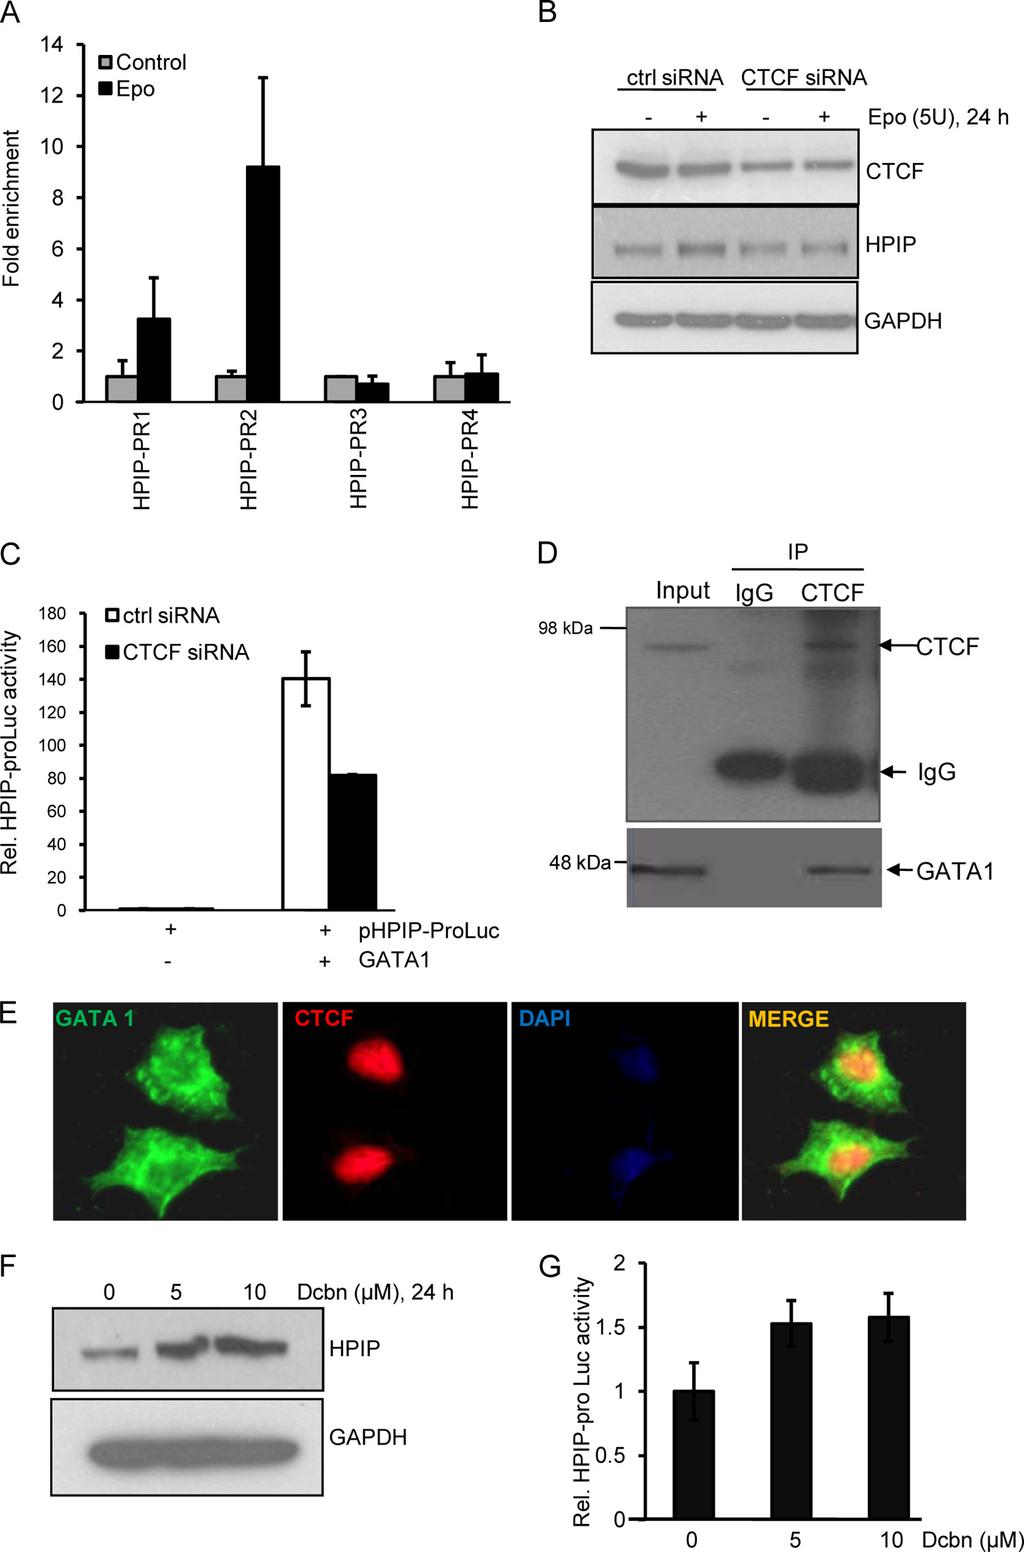 FIGURE 9. CTCF regulates HPIP expression in K562 cells. A, K562 cells were either treated or untreated with Epo (5 units/ml) for 4 h, and ChIP assay was performed using anti-ctcf antibody.